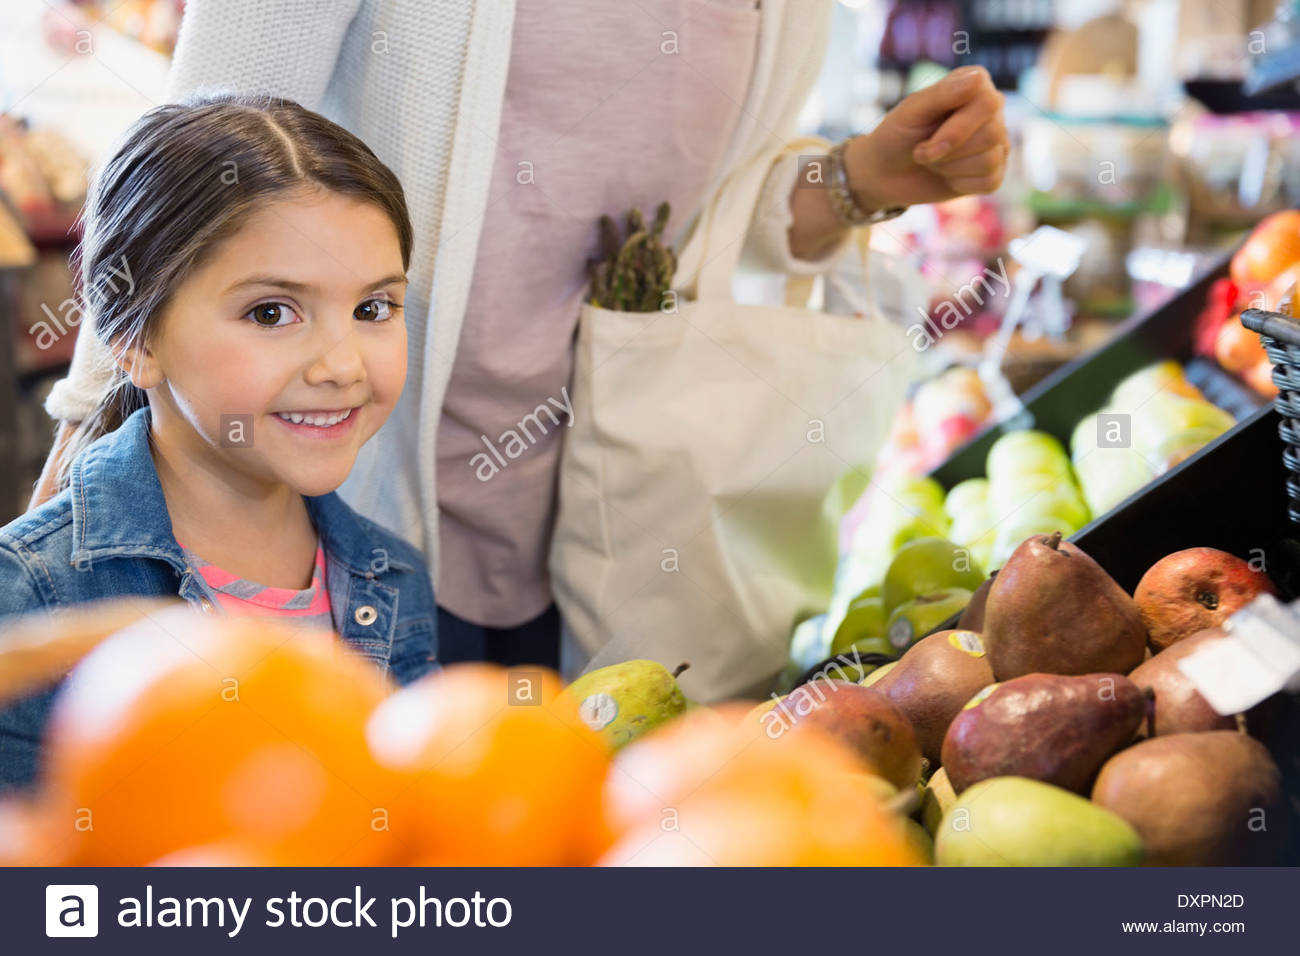 Portrait of girl shopping for produce in market Stock Photo